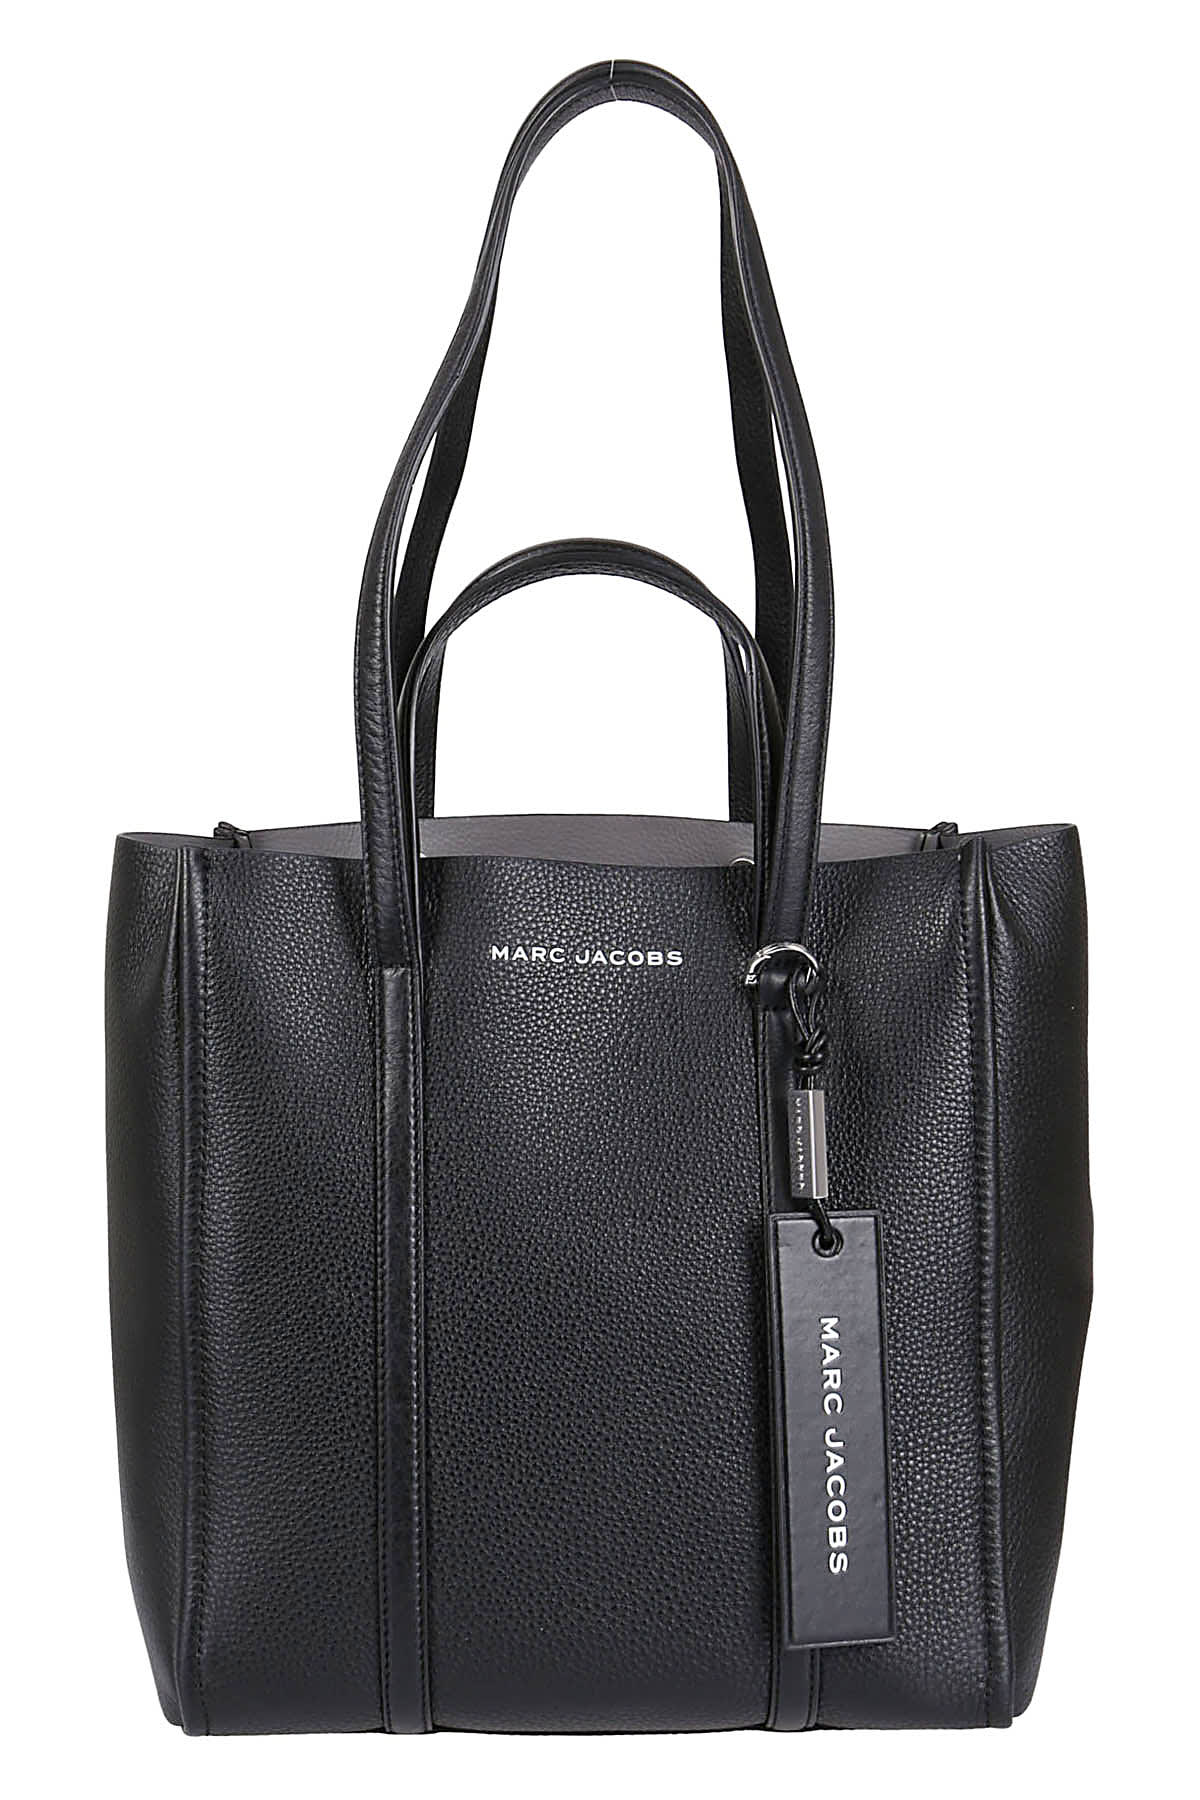 MARC JACOBS THE TAG TOTE 27 BAG